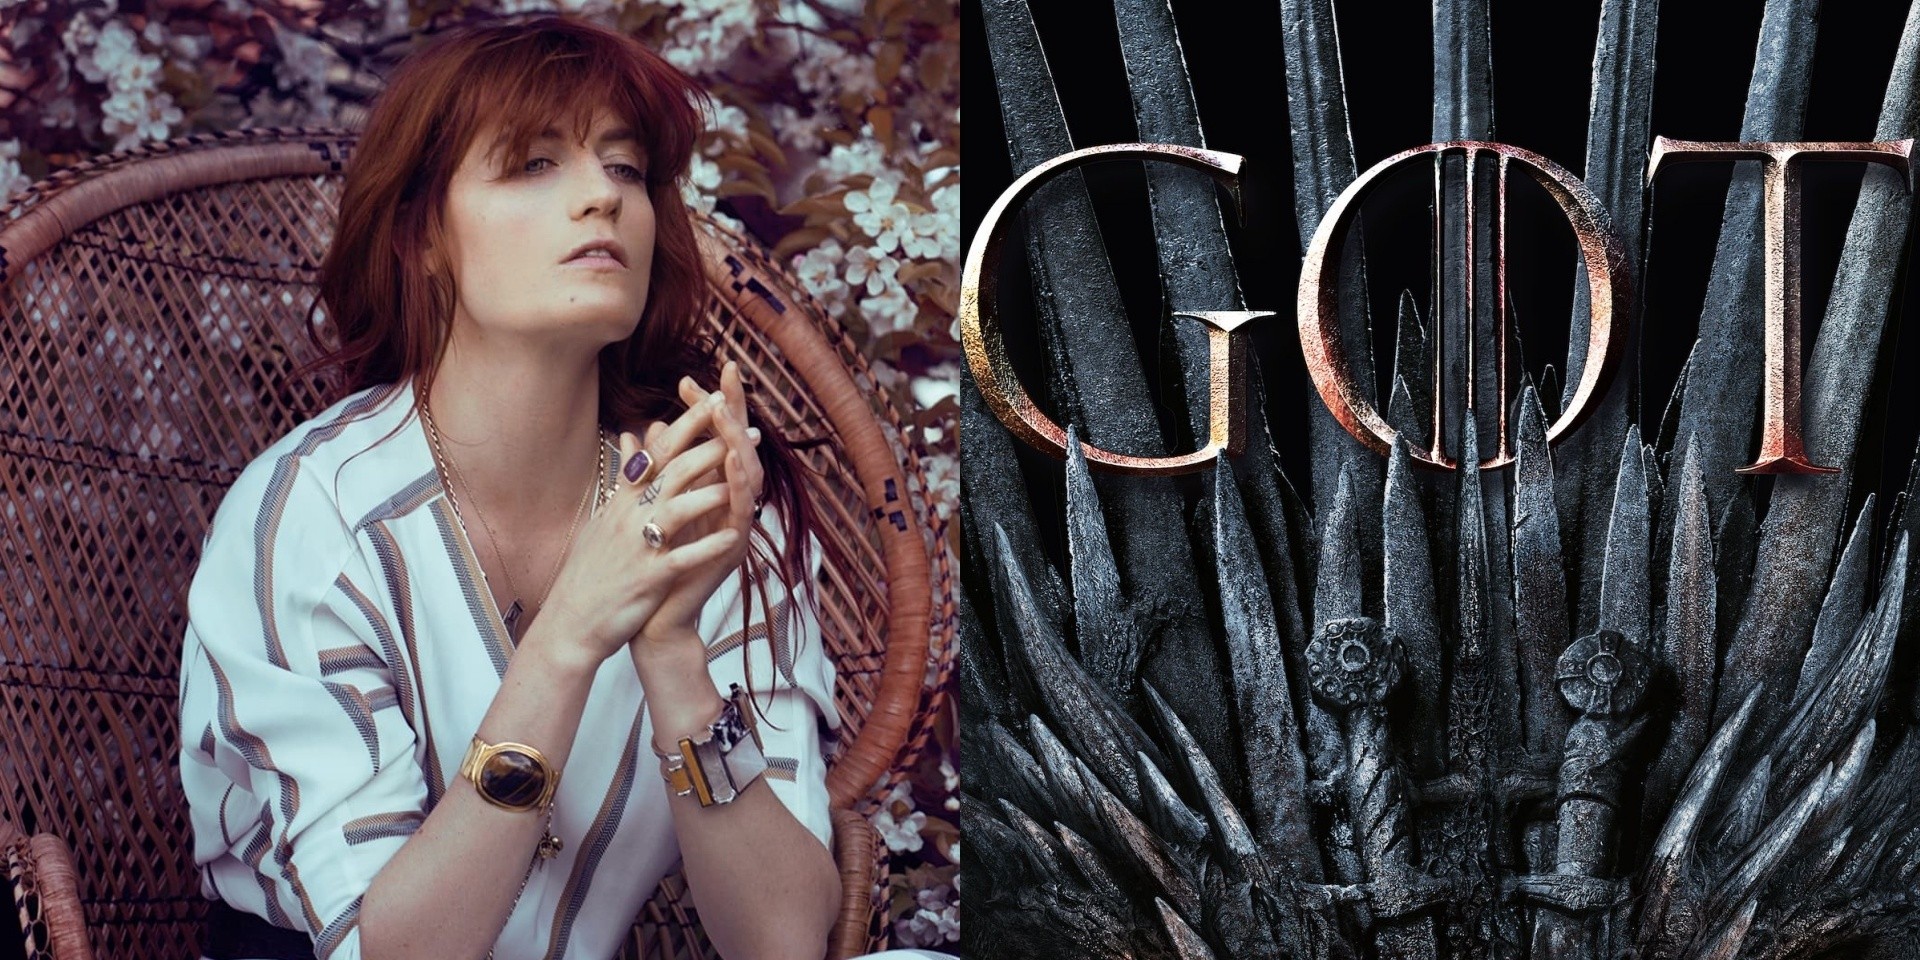 Florence + The Machine premiere enchanting lullaby 'Jenny Of Oldstones' on Game Of Thrones – listen